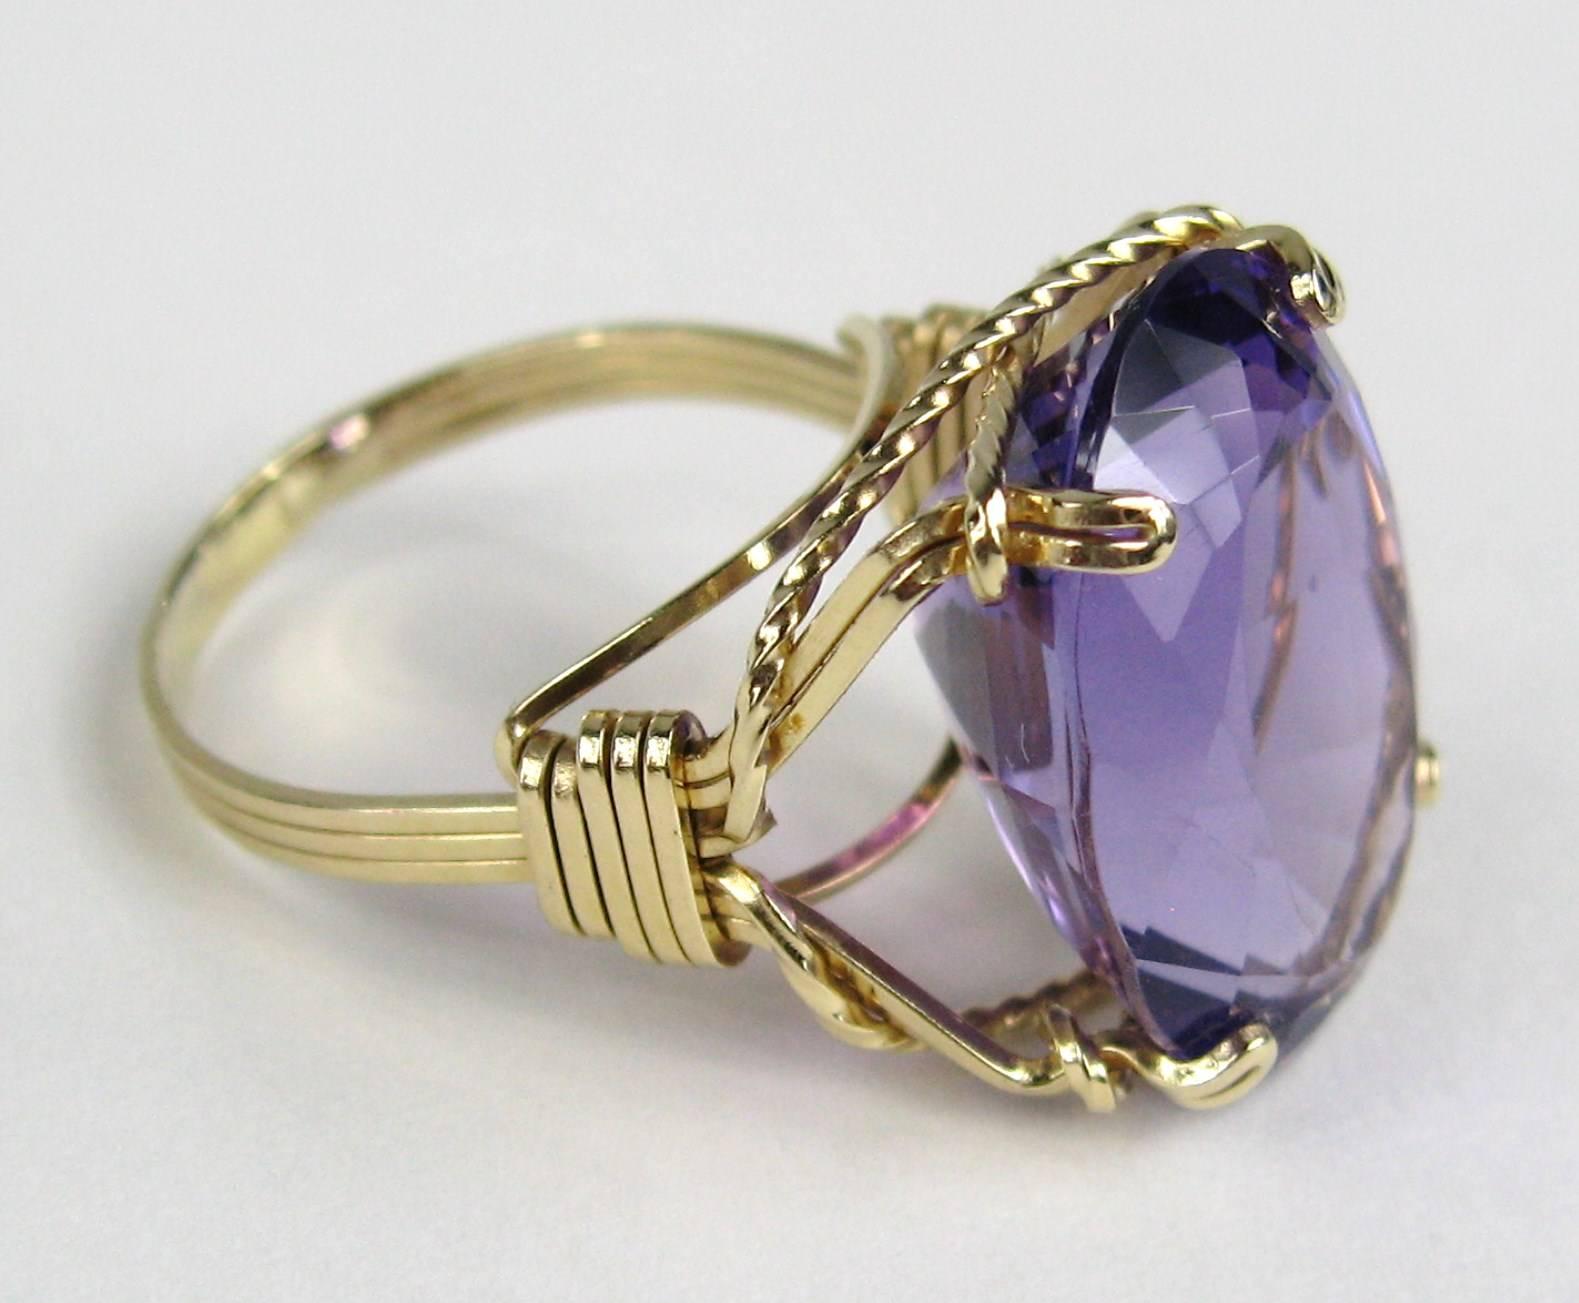 Oval Amethyst set in a 14K Gold Setting Approximately 17.25 Carats. Sits .45 in up from your finger. It is a size 8.5 and can be sized by your jeweler or by us.  This is out of our massive collection of Hopi, Zuni, Navajo, Southwestern, sterling